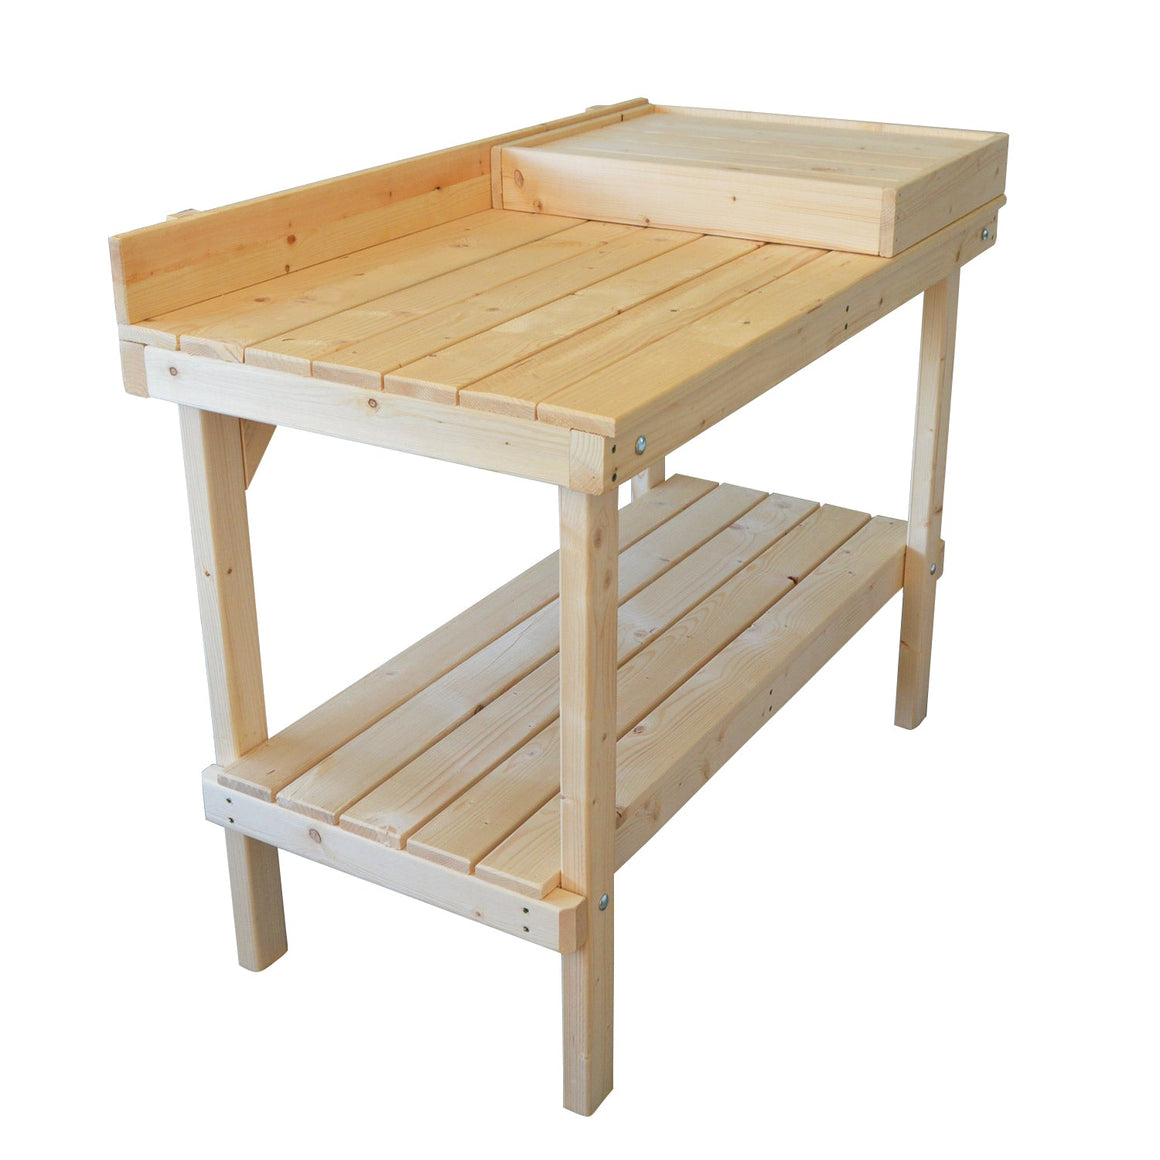 wooden outdoor table for pizza ovens